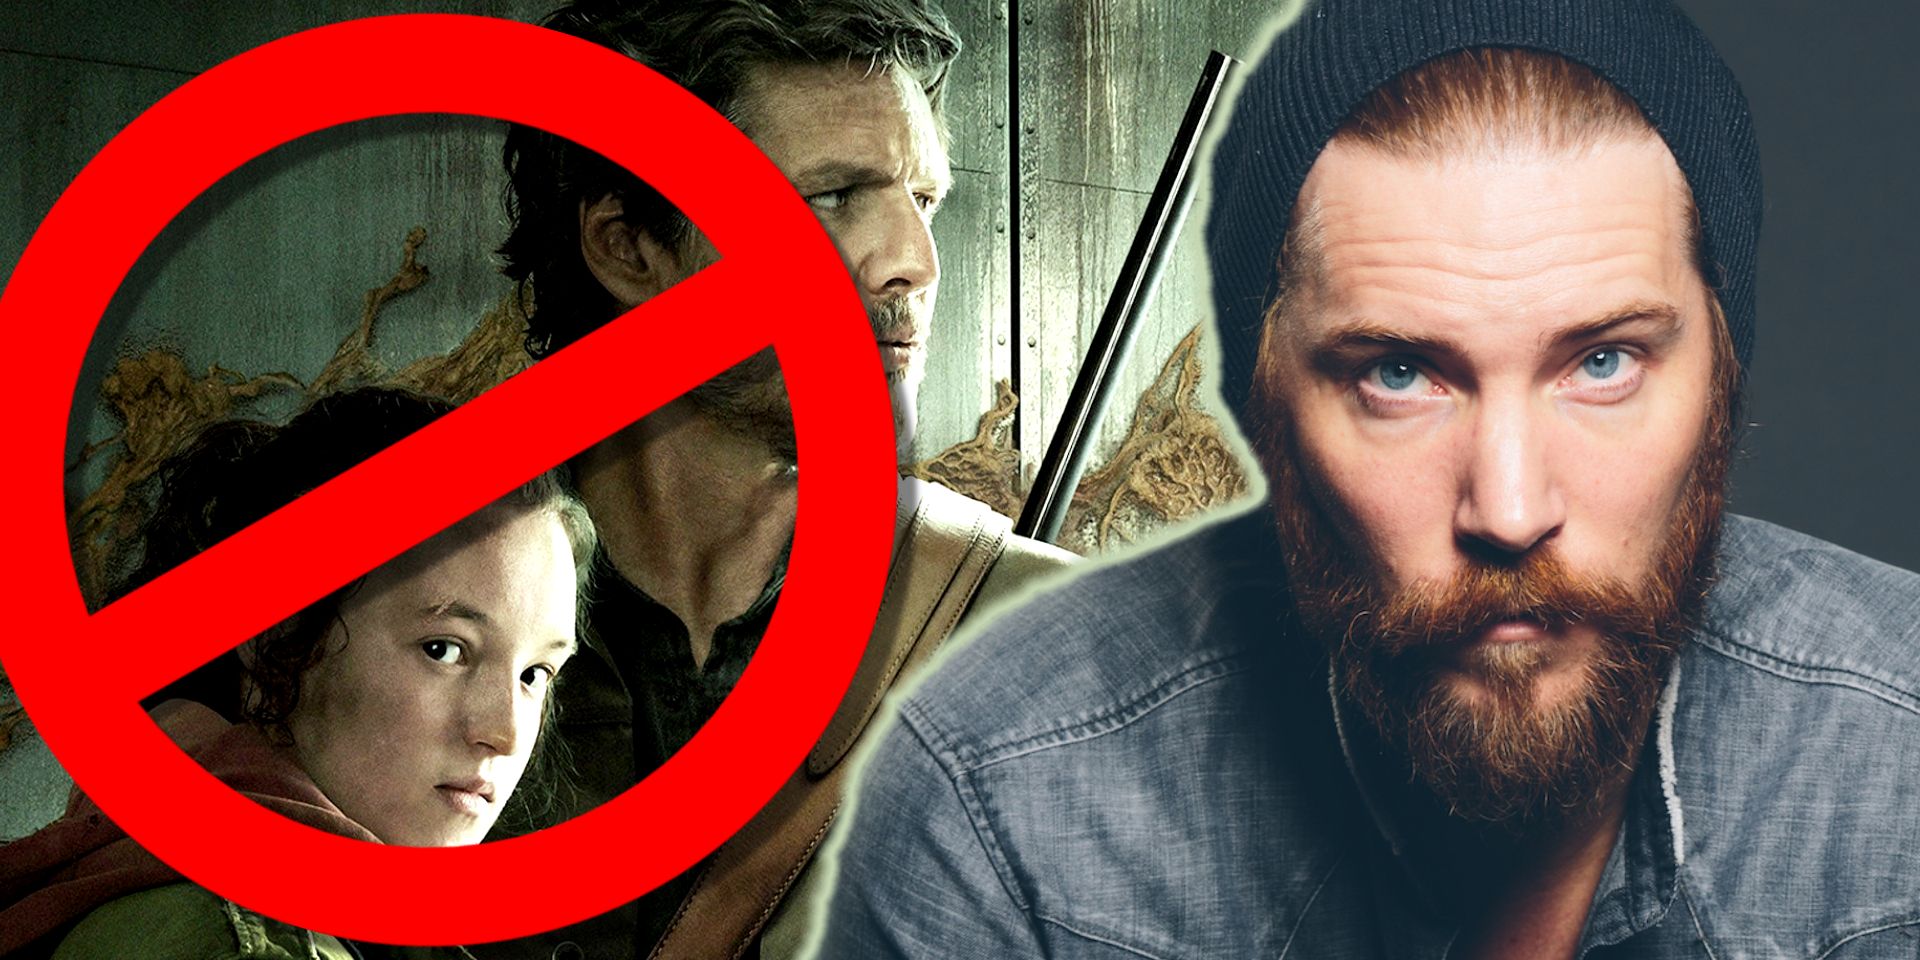 The Last of Us' Episode 8: Was That Troy Baker?